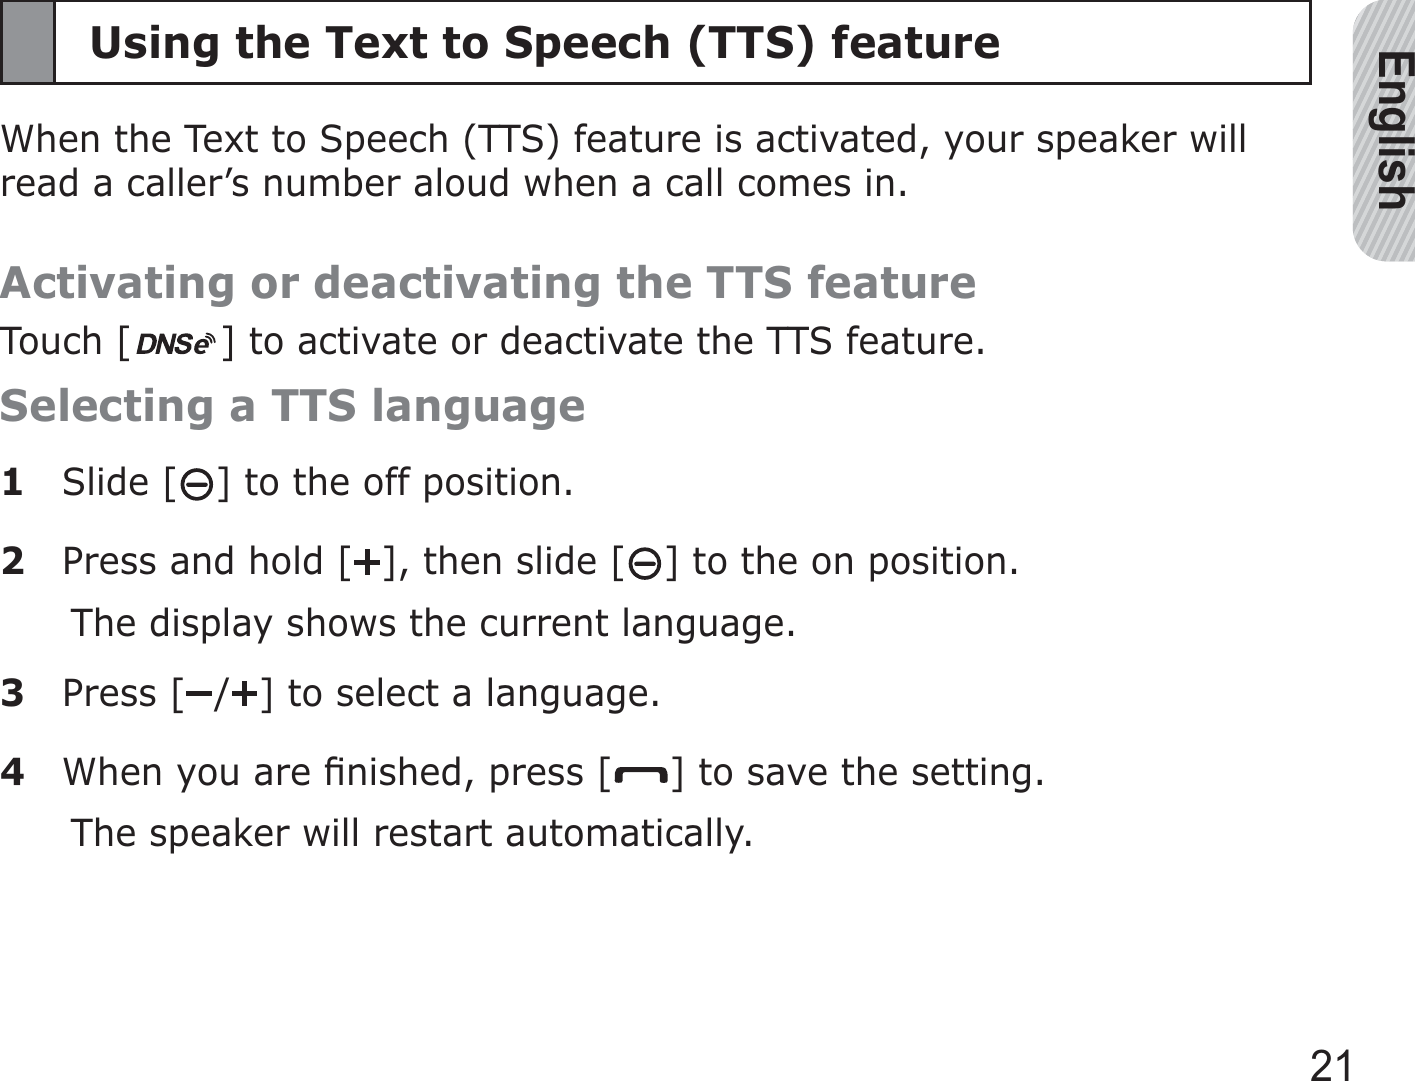 English21Using the Text to Speech (TTS) featureWhen the Text to Speech (TTS) feature is activated, your speaker will read a caller’s number aloud when a call comes in.Activating or deactivating the TTS featureTouch [ ] to activate or deactivate the TTS feature.Selecting a TTS language1 Slide [ ] to the off position. 2  Press and hold [ ], then slide [ ] to the on position.The display shows the current language.3 Press [ / ] to select a language.4  When you are ﬁnished, press [ ] to save the setting. The speaker will restart automatically.